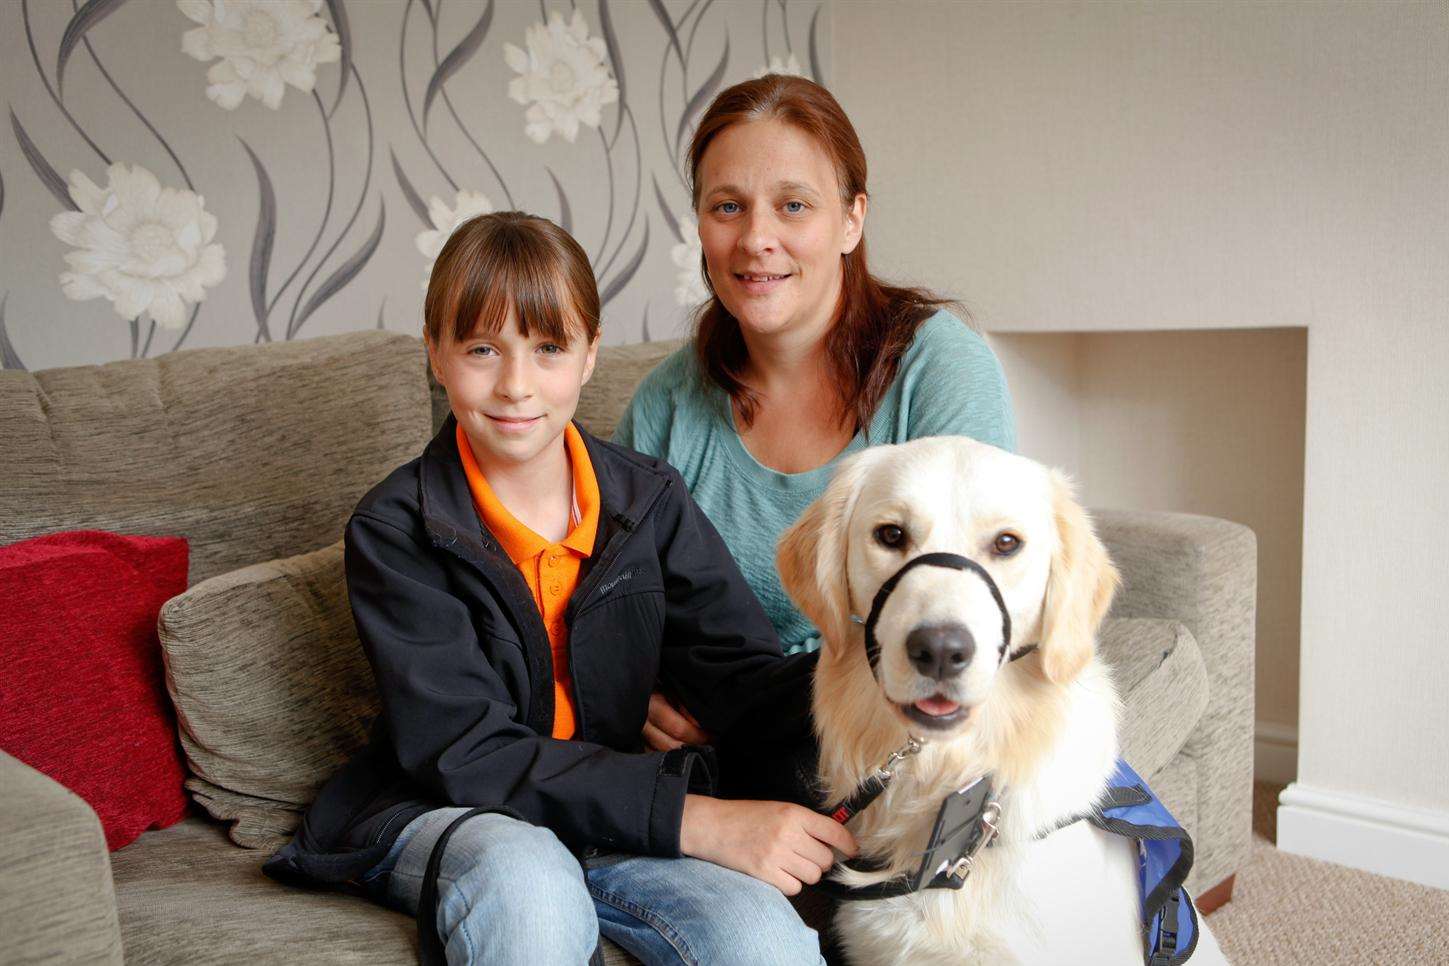 Mum Emma says the dog should open up Amy's world as she starts at secondary school